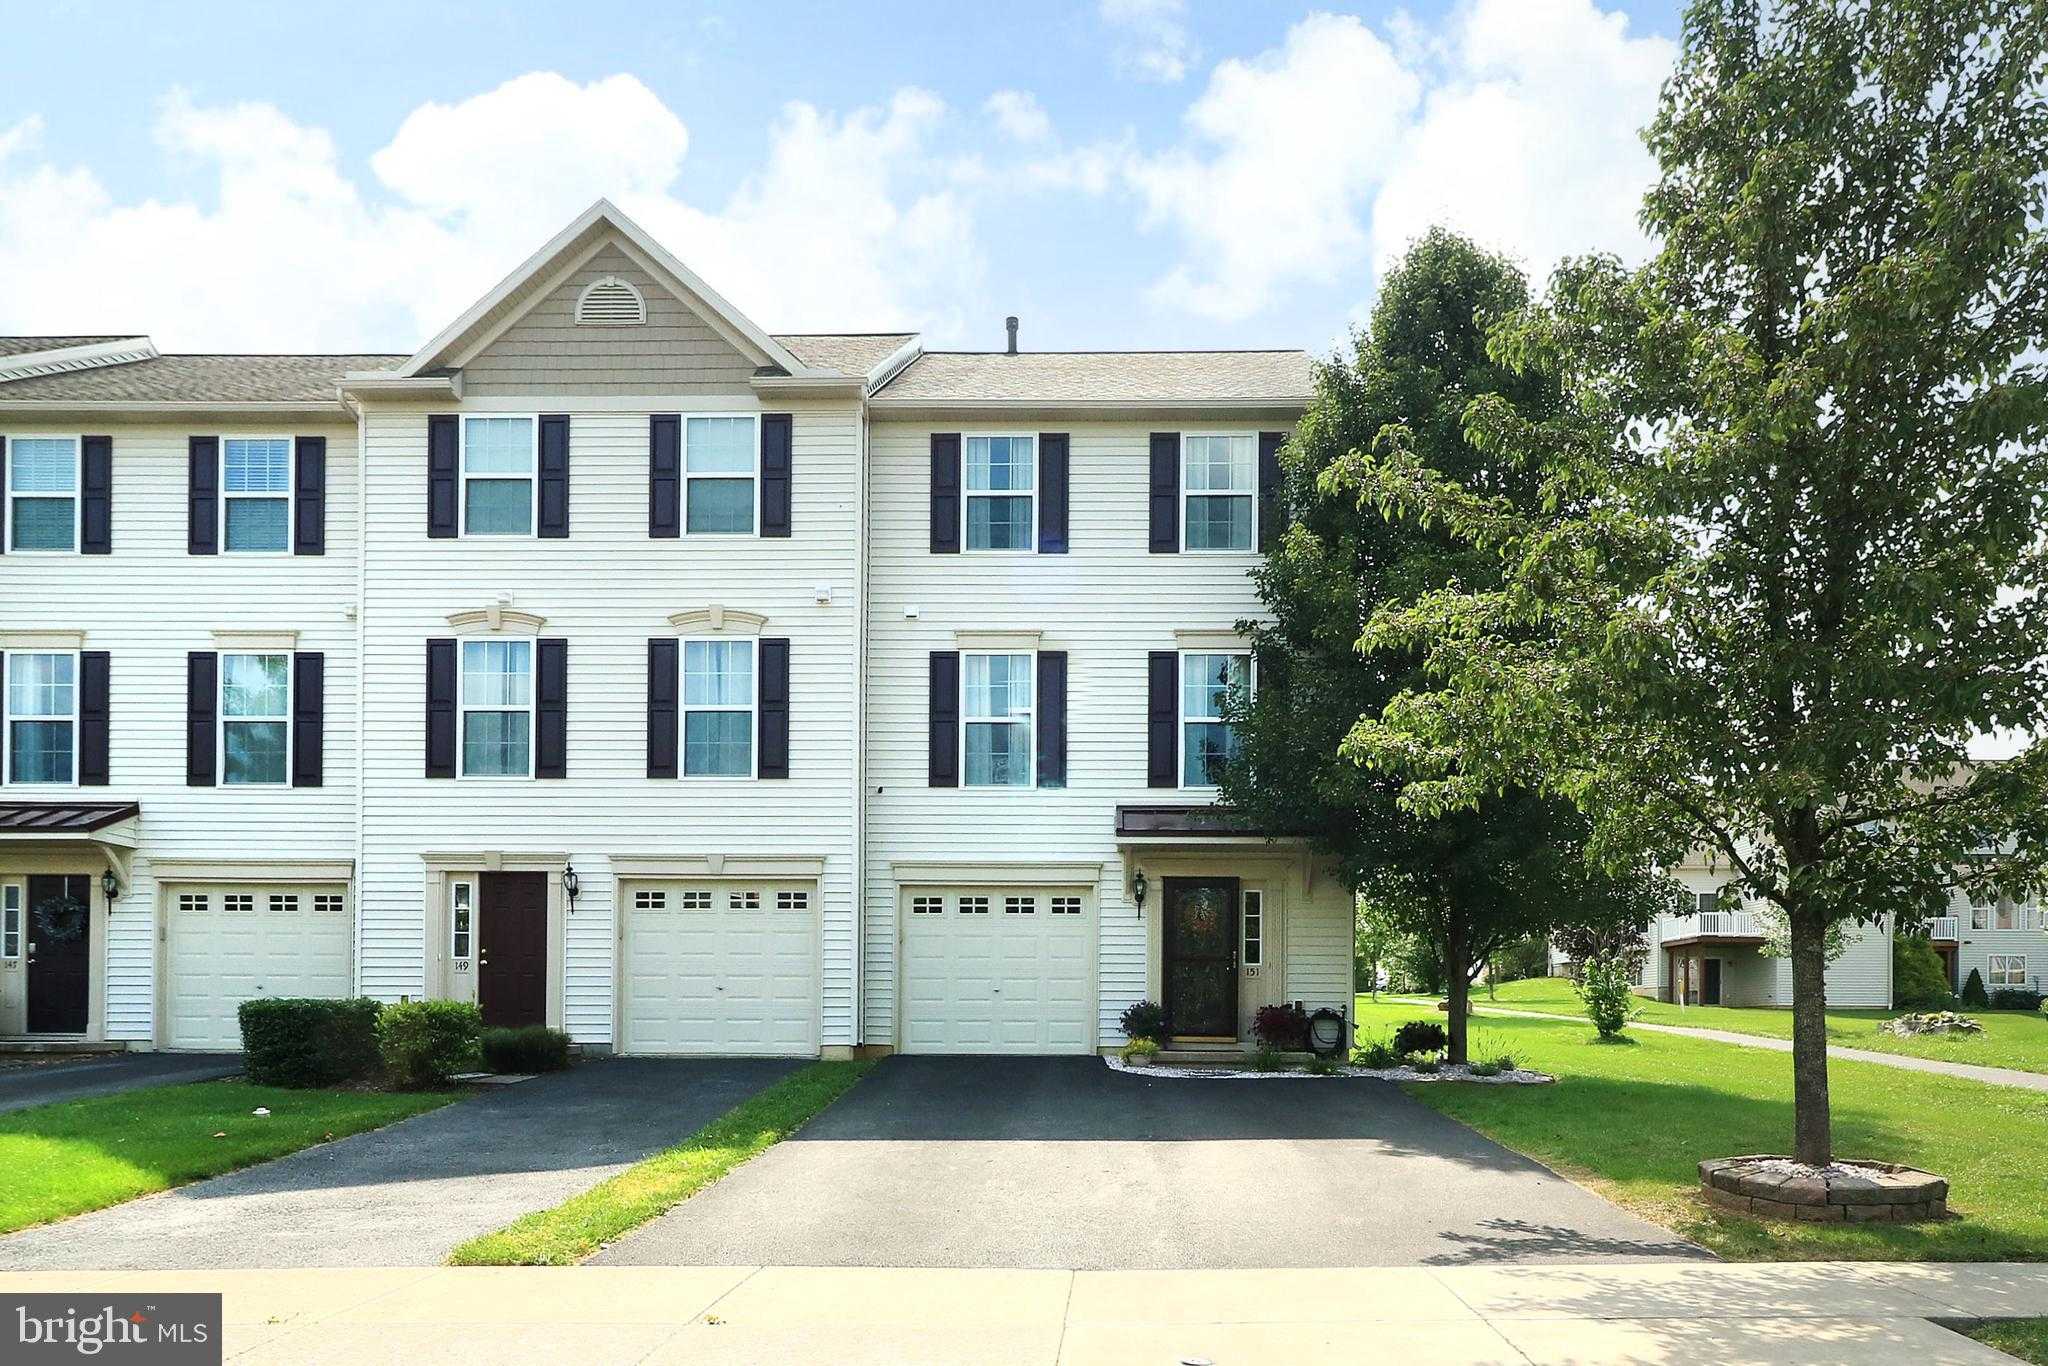 View BELLEFONTE, PA 16823 townhome